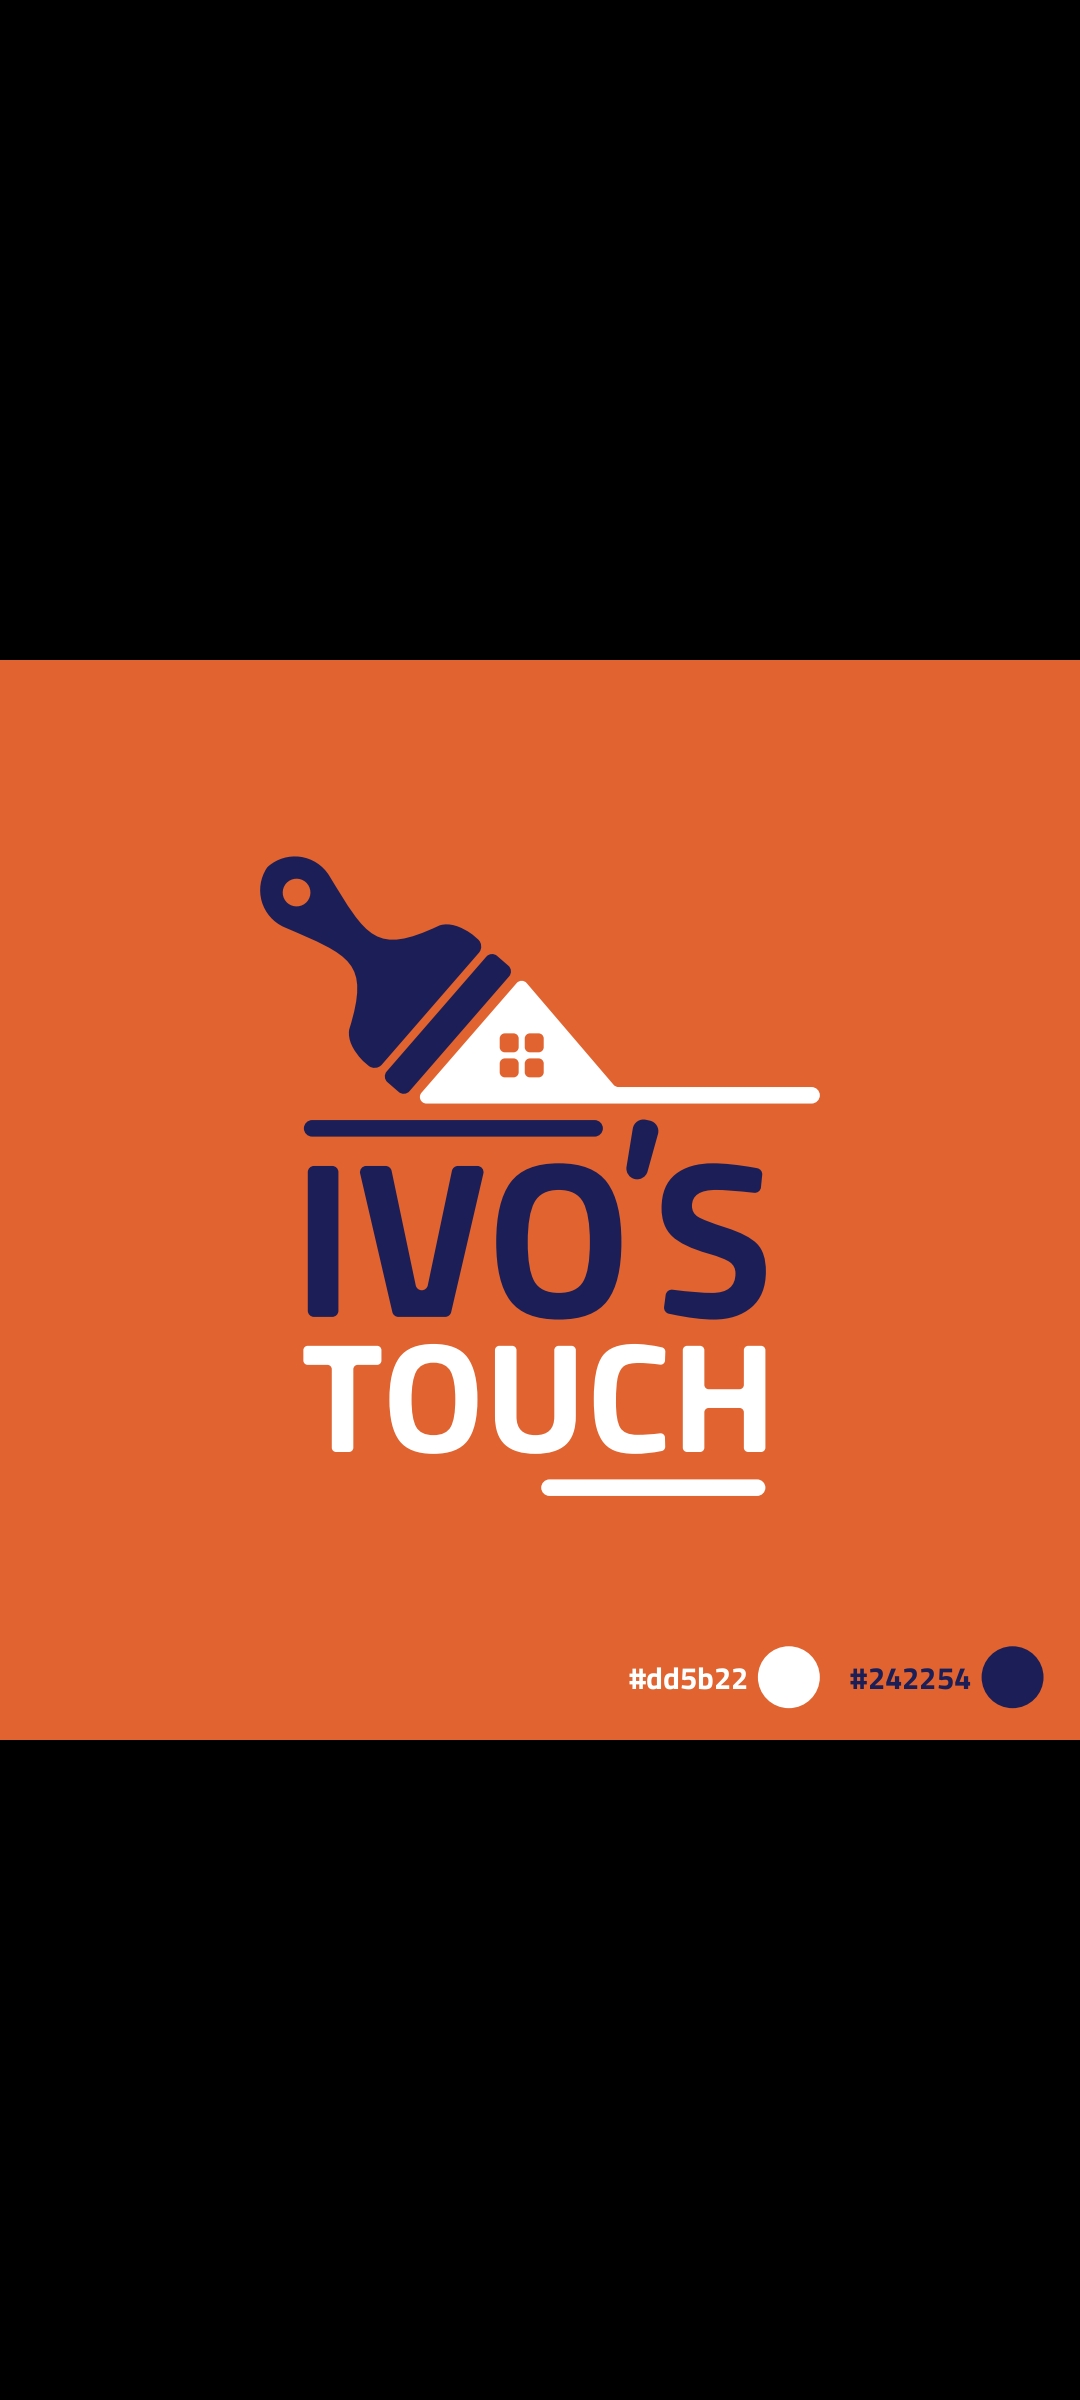 Ivo's Touch Logo